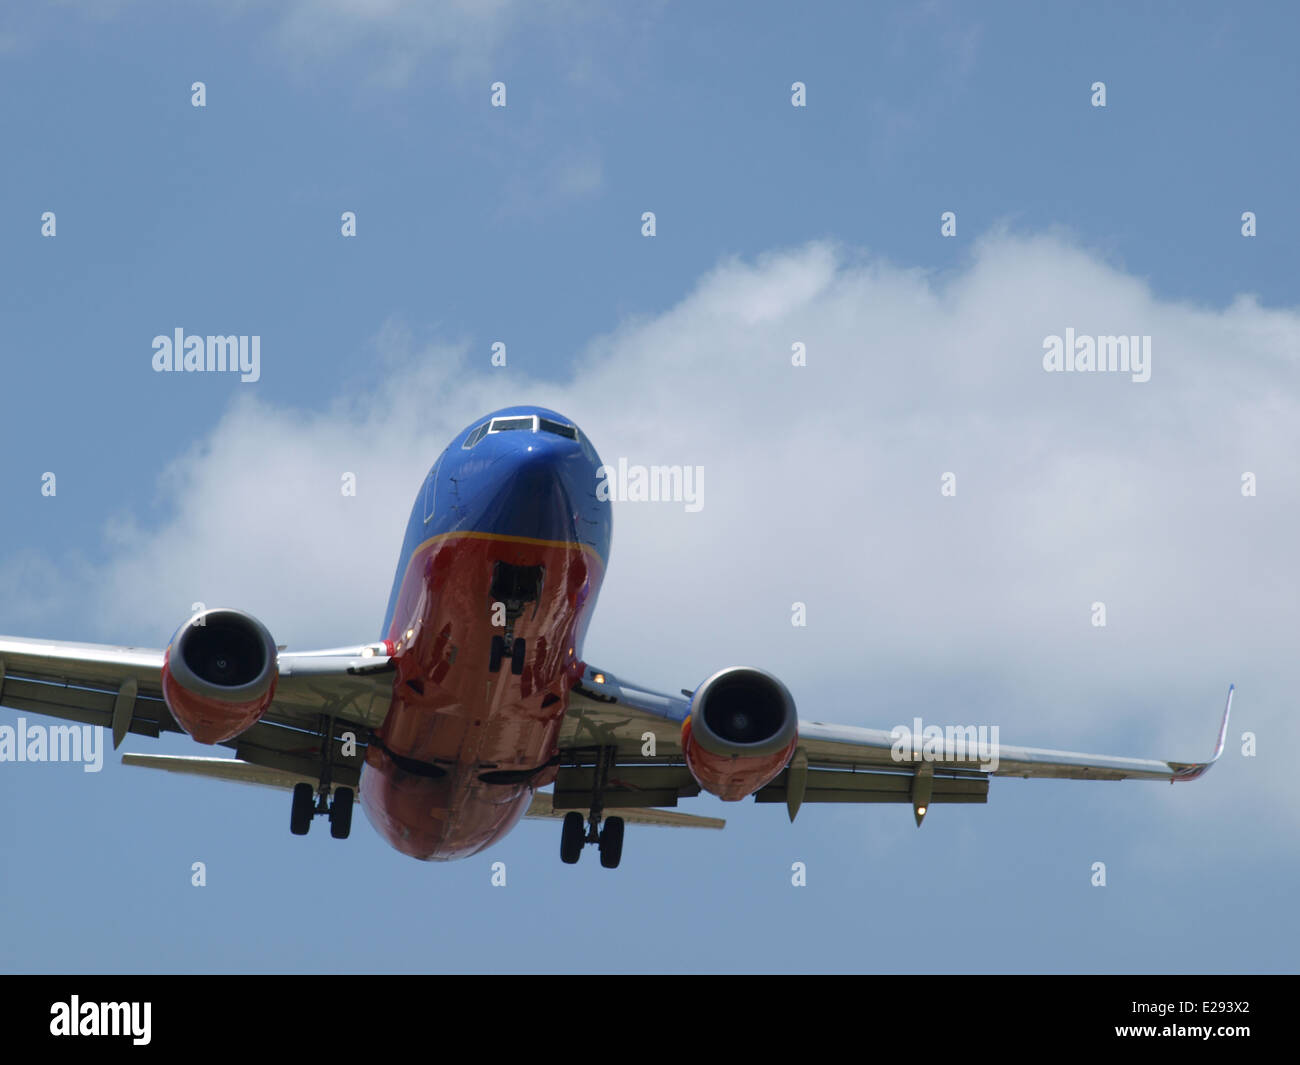 A Boeing 737 jet landing at Love Field, Dallas, US. Love Field is the close-in airport. DFW is the big airport. Stock Photo